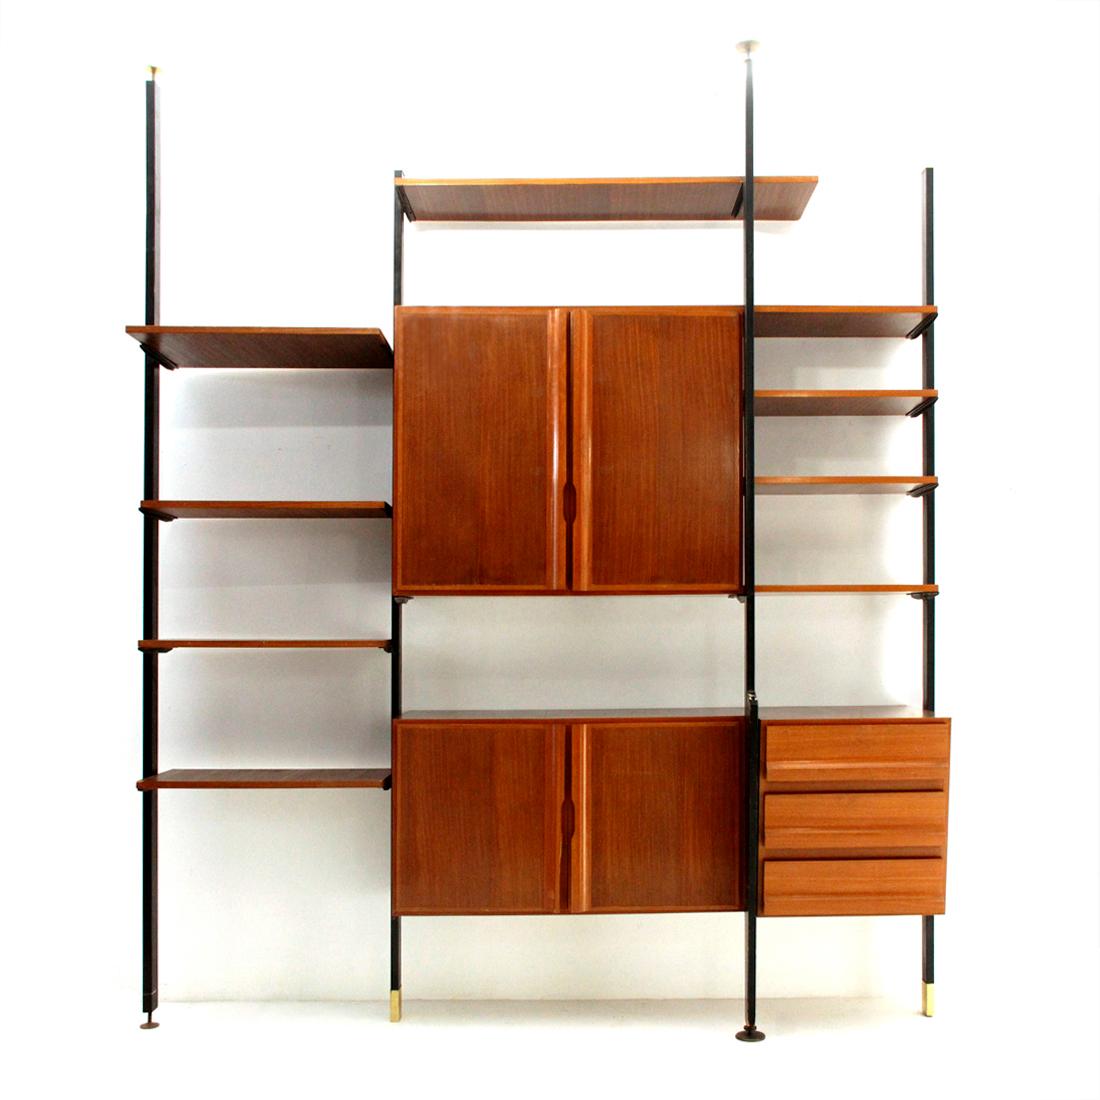 Italian manufacture wall unit produced in the 1950s.
Structure and uprights in black painted metal, terminals and feet in brass.
Shelves and storages in veneered wood.
Storage compartments and chest of drawers with carved handles.
Fair general